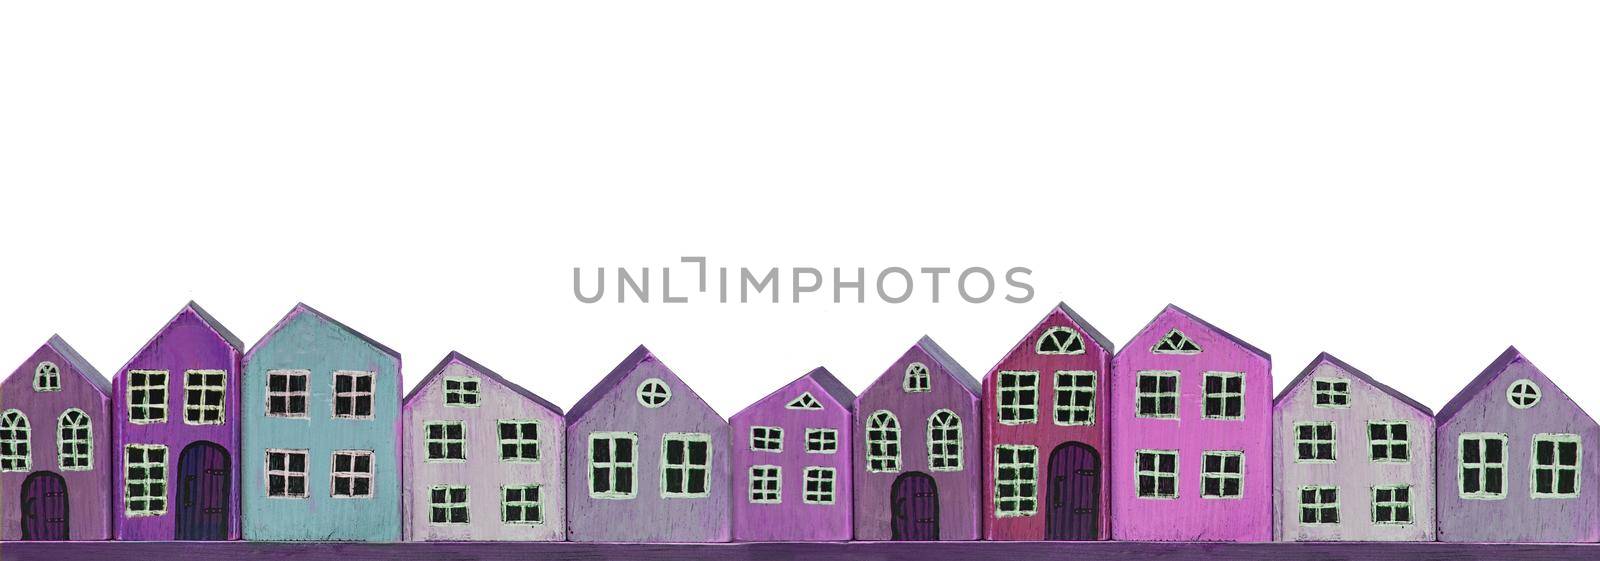 Wooden toy purple houses on a white background. Banner miniature town.